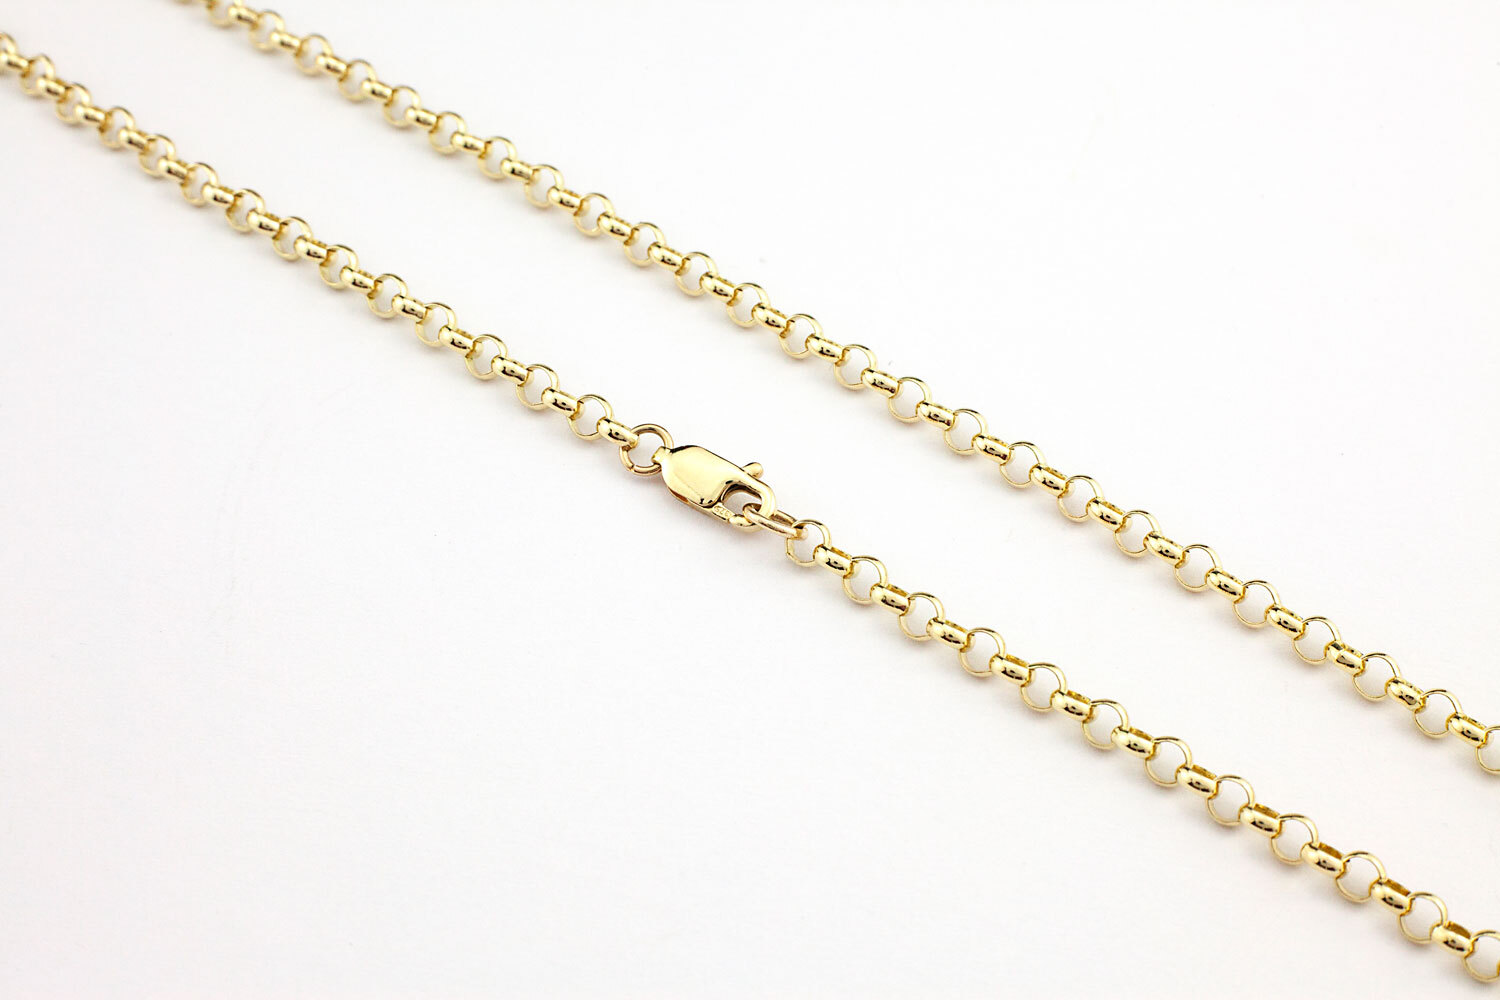 40cm Oval Belcher Chain Necklace in 9ct Yellow Gold